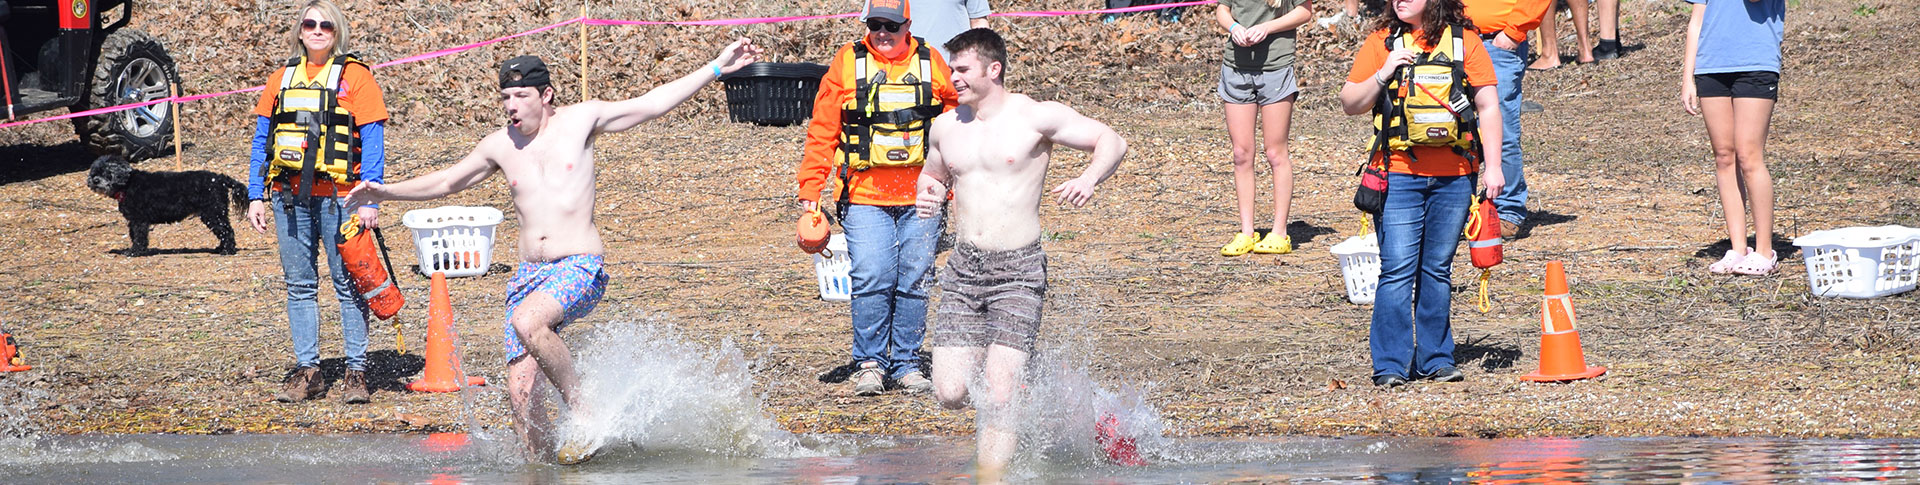 WKY Plunge Register Today